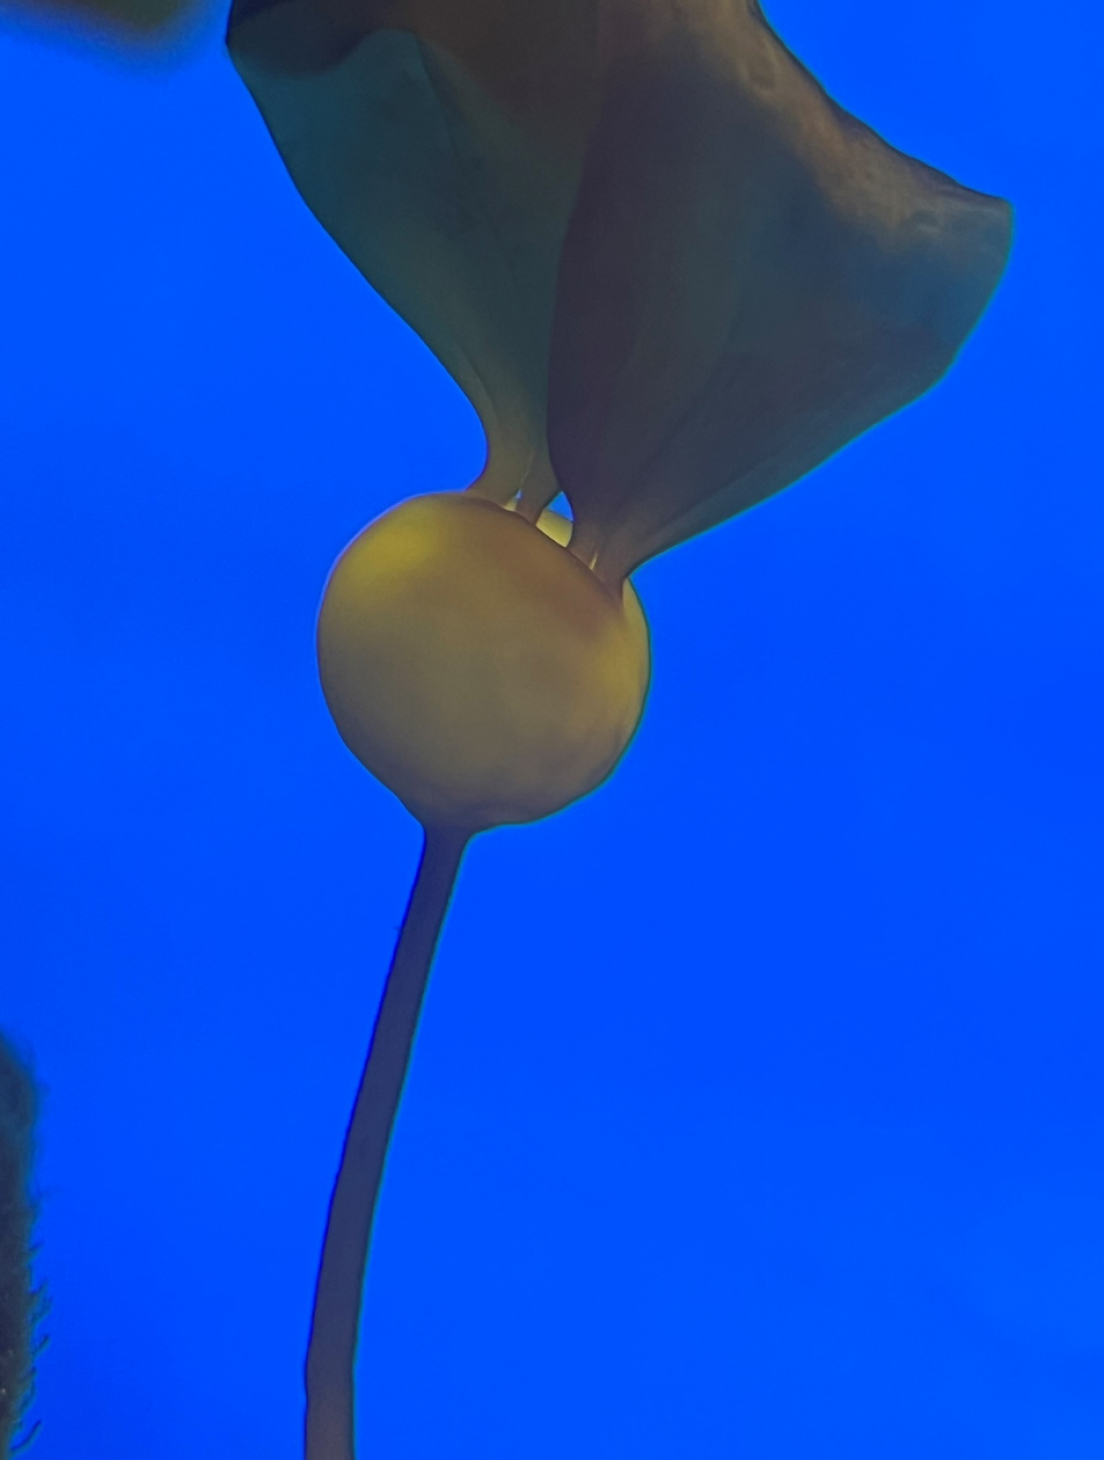 Ball shaped kelp frond in front of blue background.